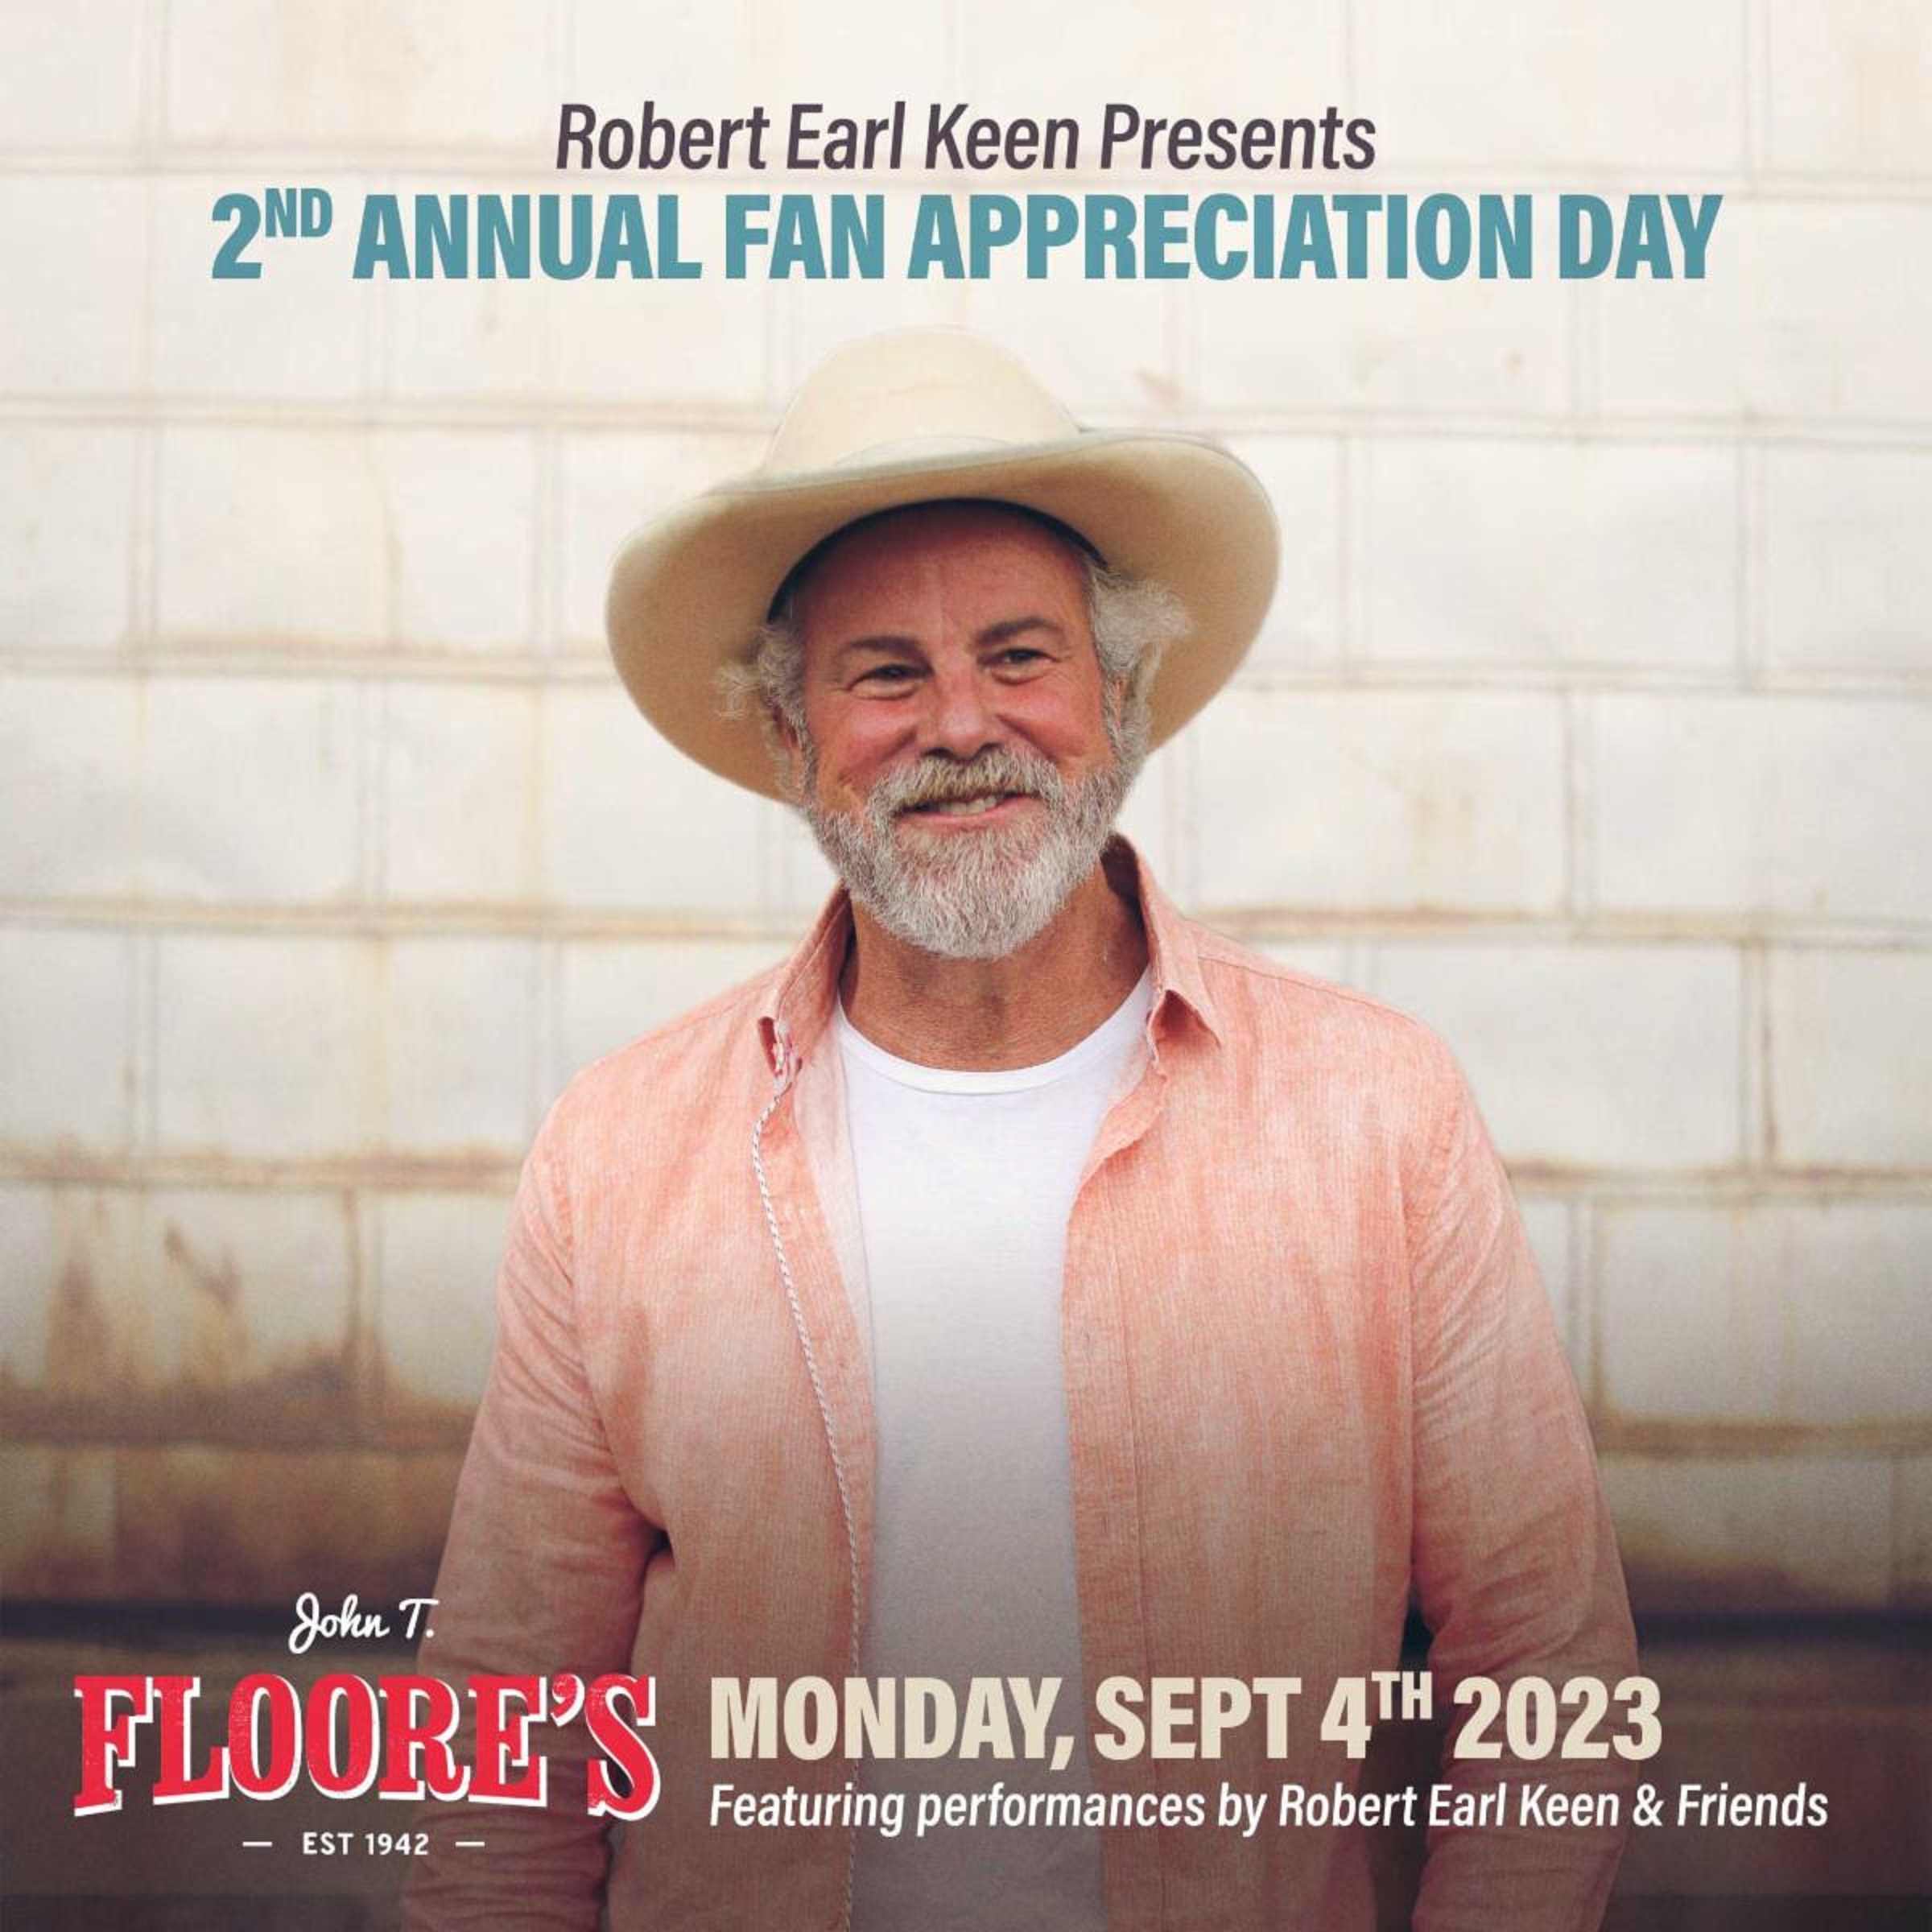 Robert Earl Keen Refuses To Let His Western Chill Summer End, Announcing 2nd Annual Fan Appreciation Day On Labor Day 2023